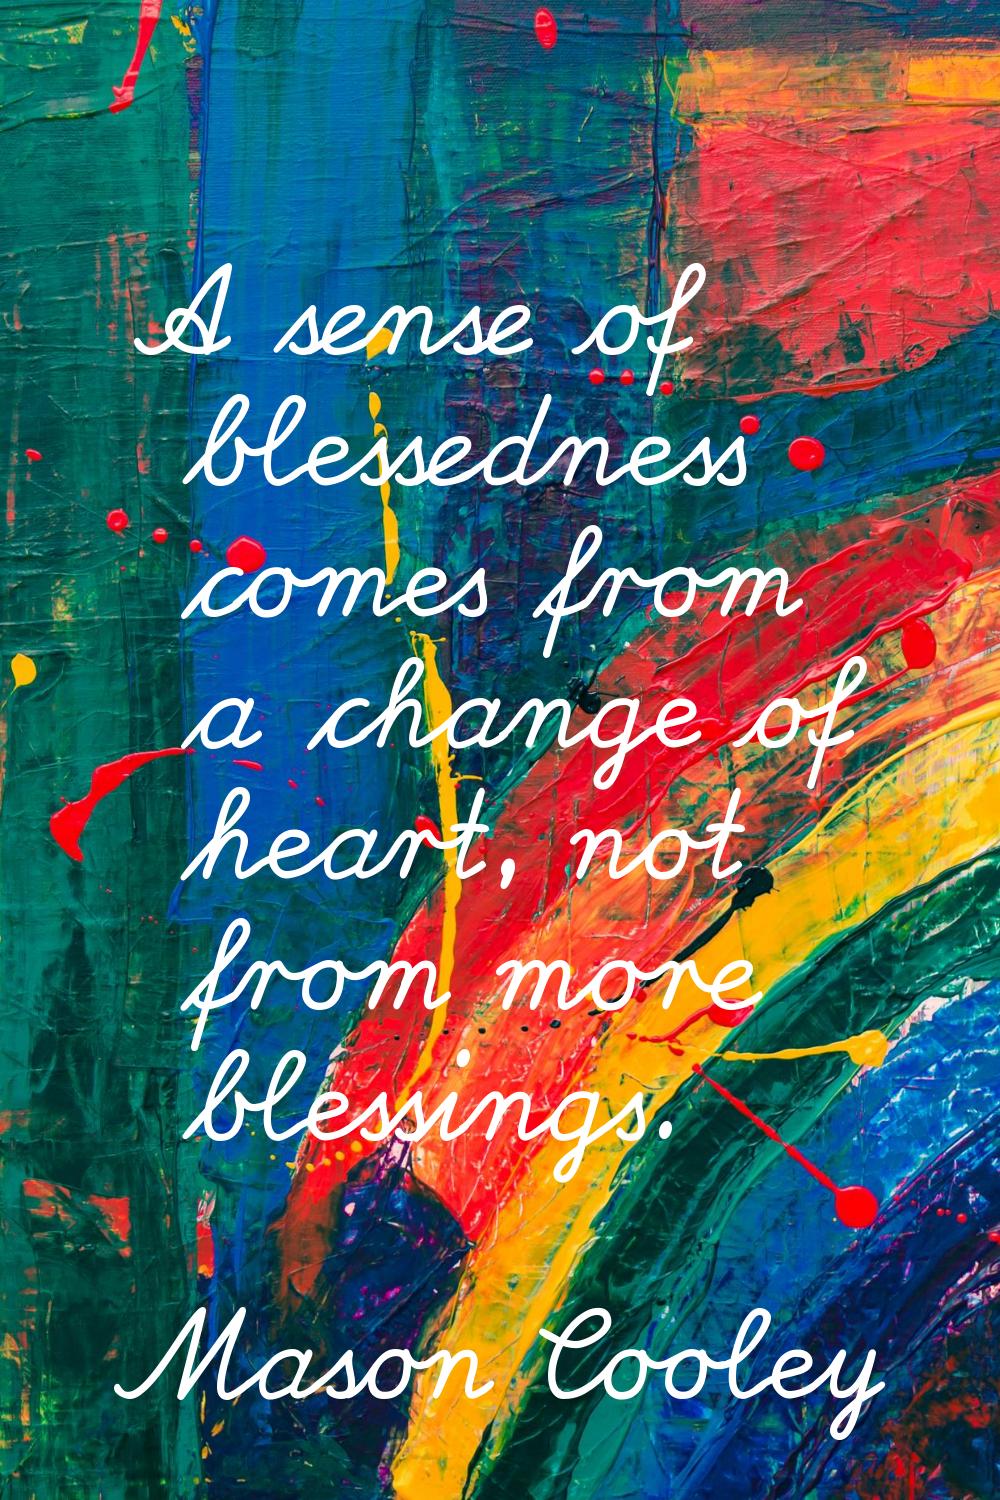 A sense of blessedness comes from a change of heart, not from more blessings.